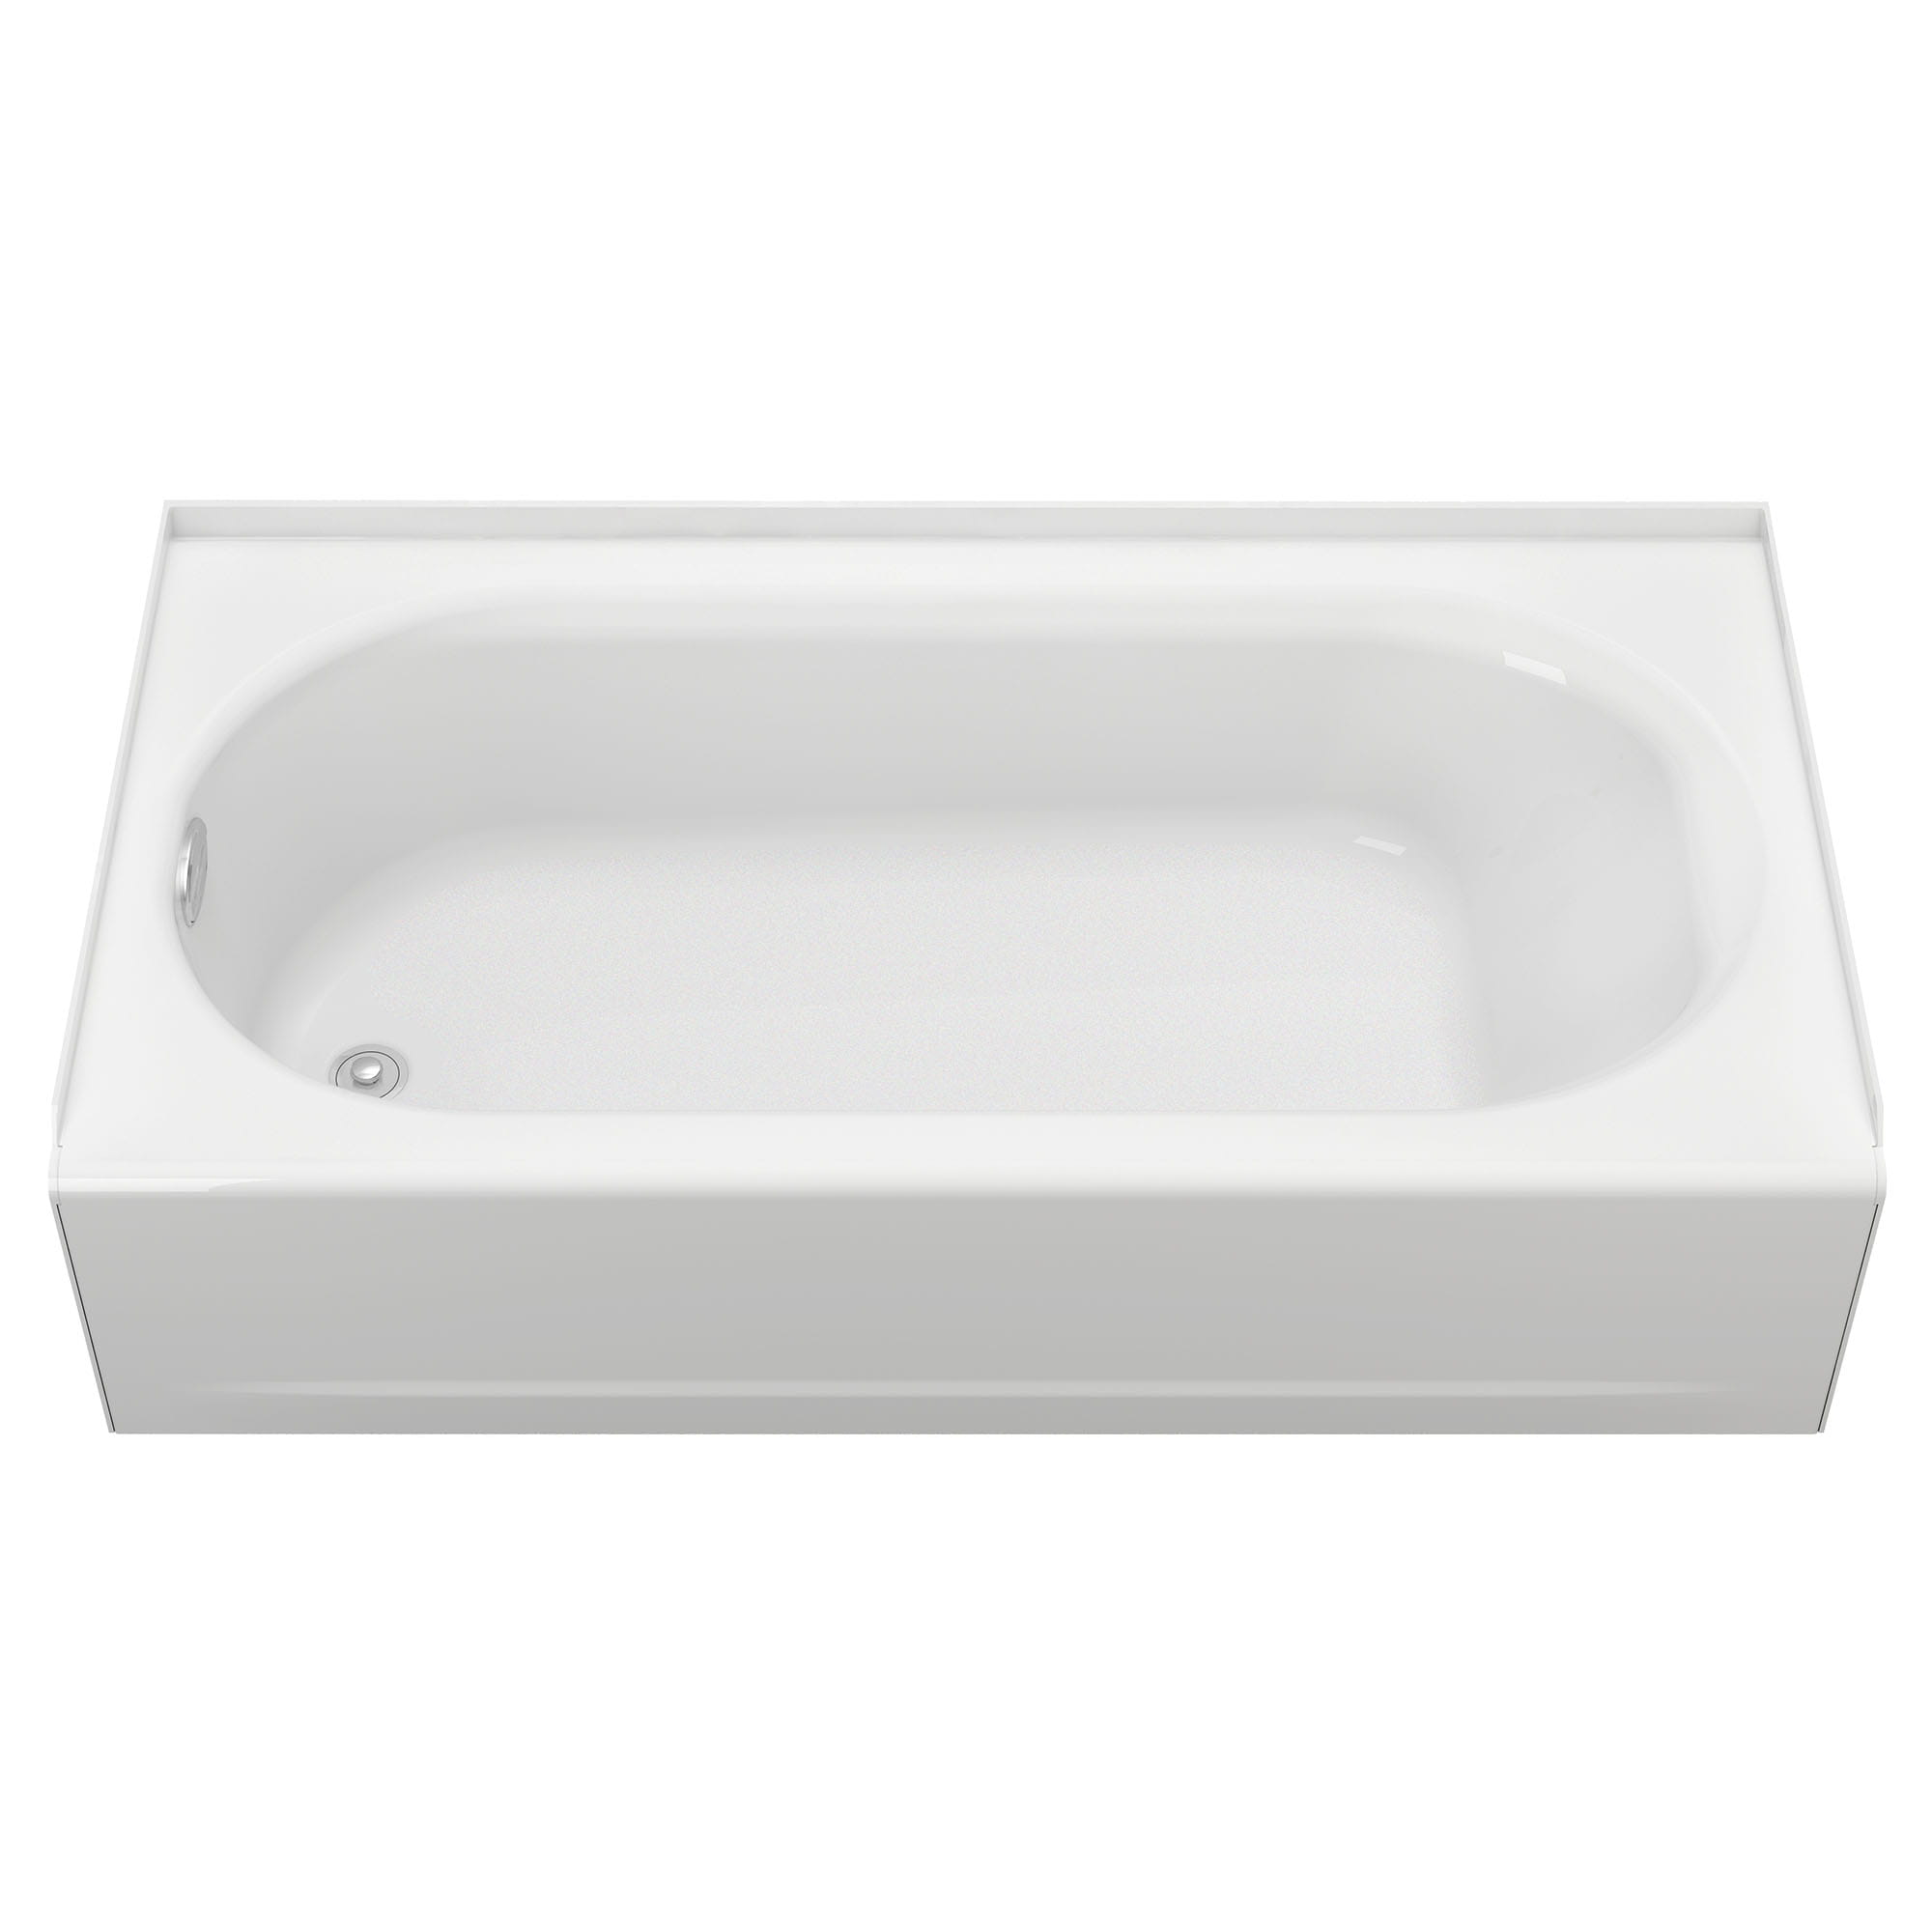 Princeton® Americast® 60 x 30-Inch Integral Apron Bathtub Left-Hand Outlet With Integral Drain